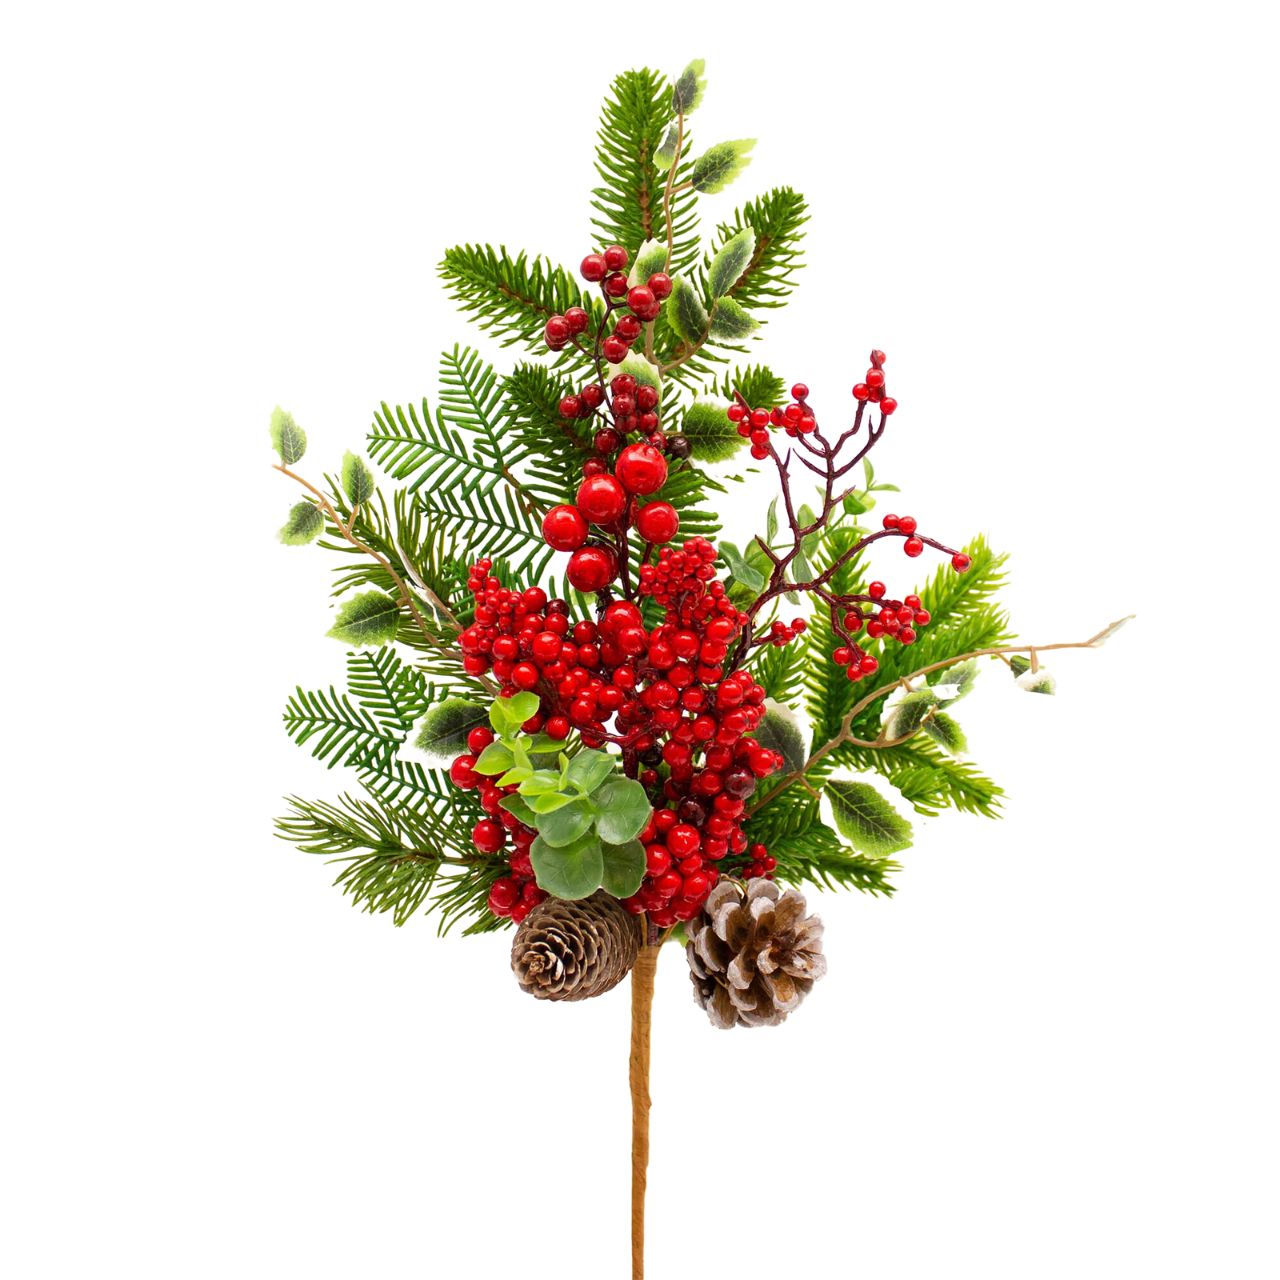 Enchante Christmas Festive Gathering Stem 56 cm  Experience the holiday season with the Enchante Christmas Festive Gathering Stem. Its vibrant colours and classic design make it perfect for any festive gathering. Enjoy the rich hues and festive flair right from your home.